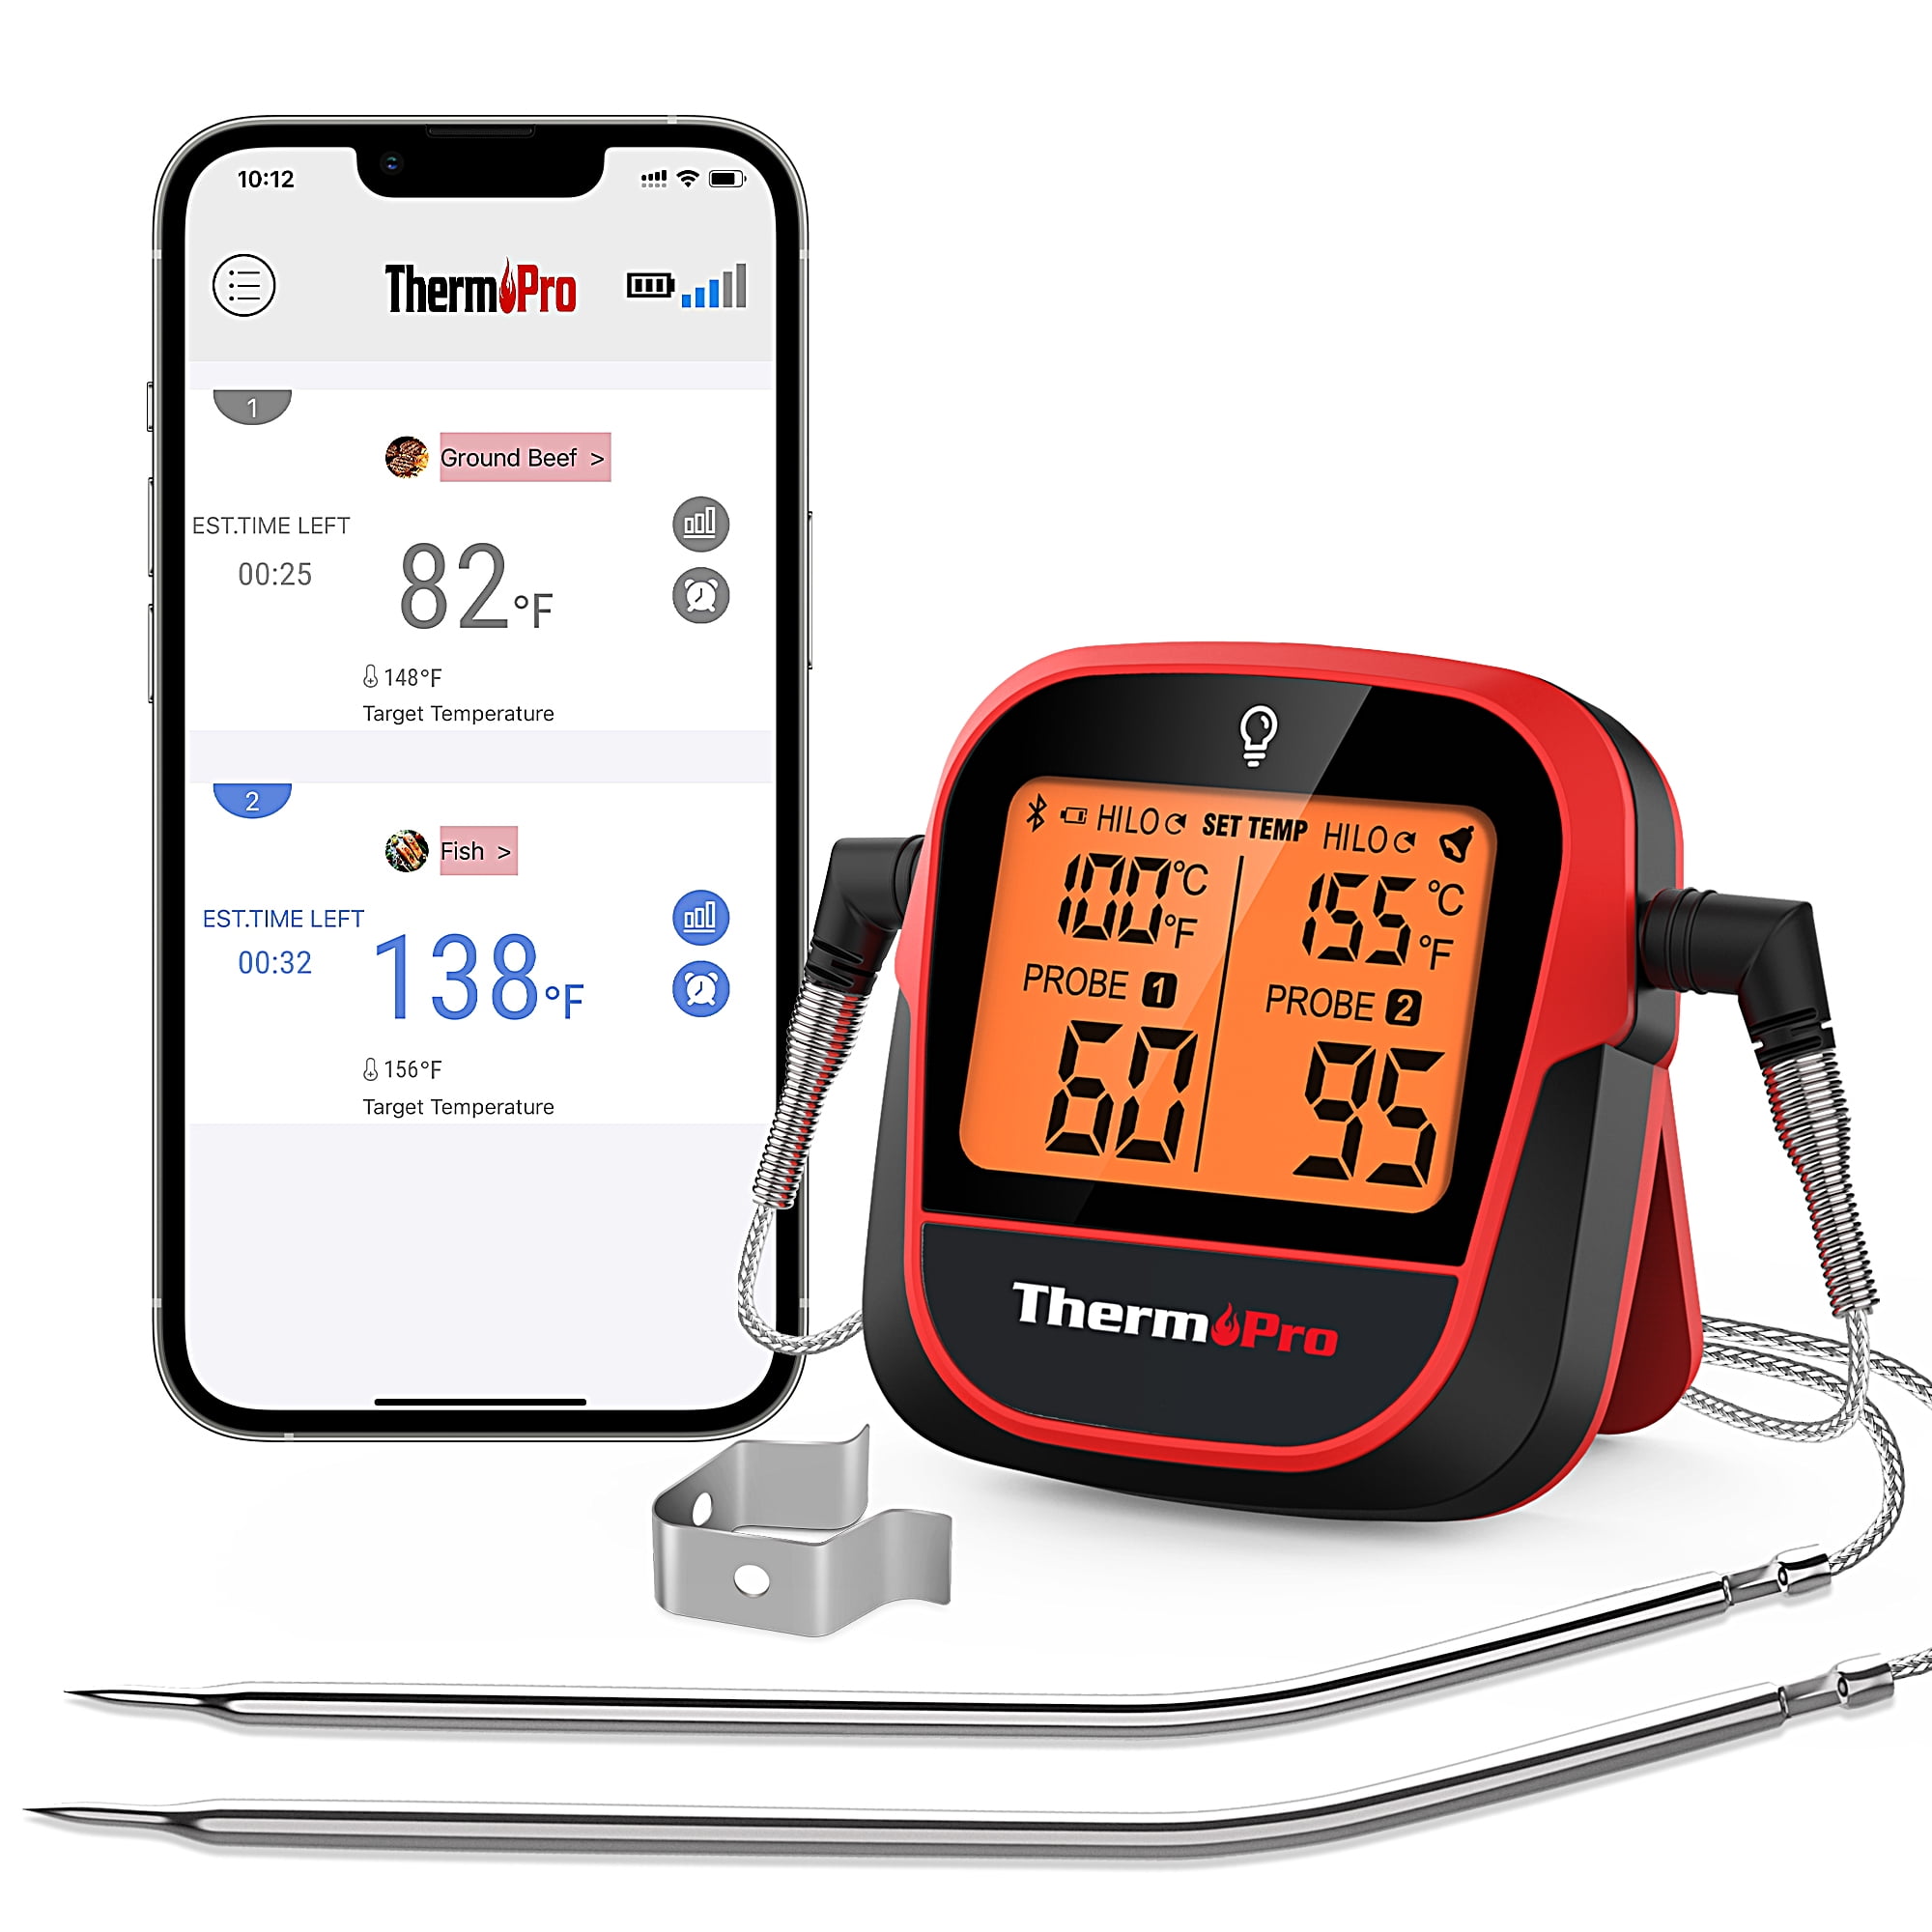 Soraken Wireless Meat Thermometer Review: Works Well